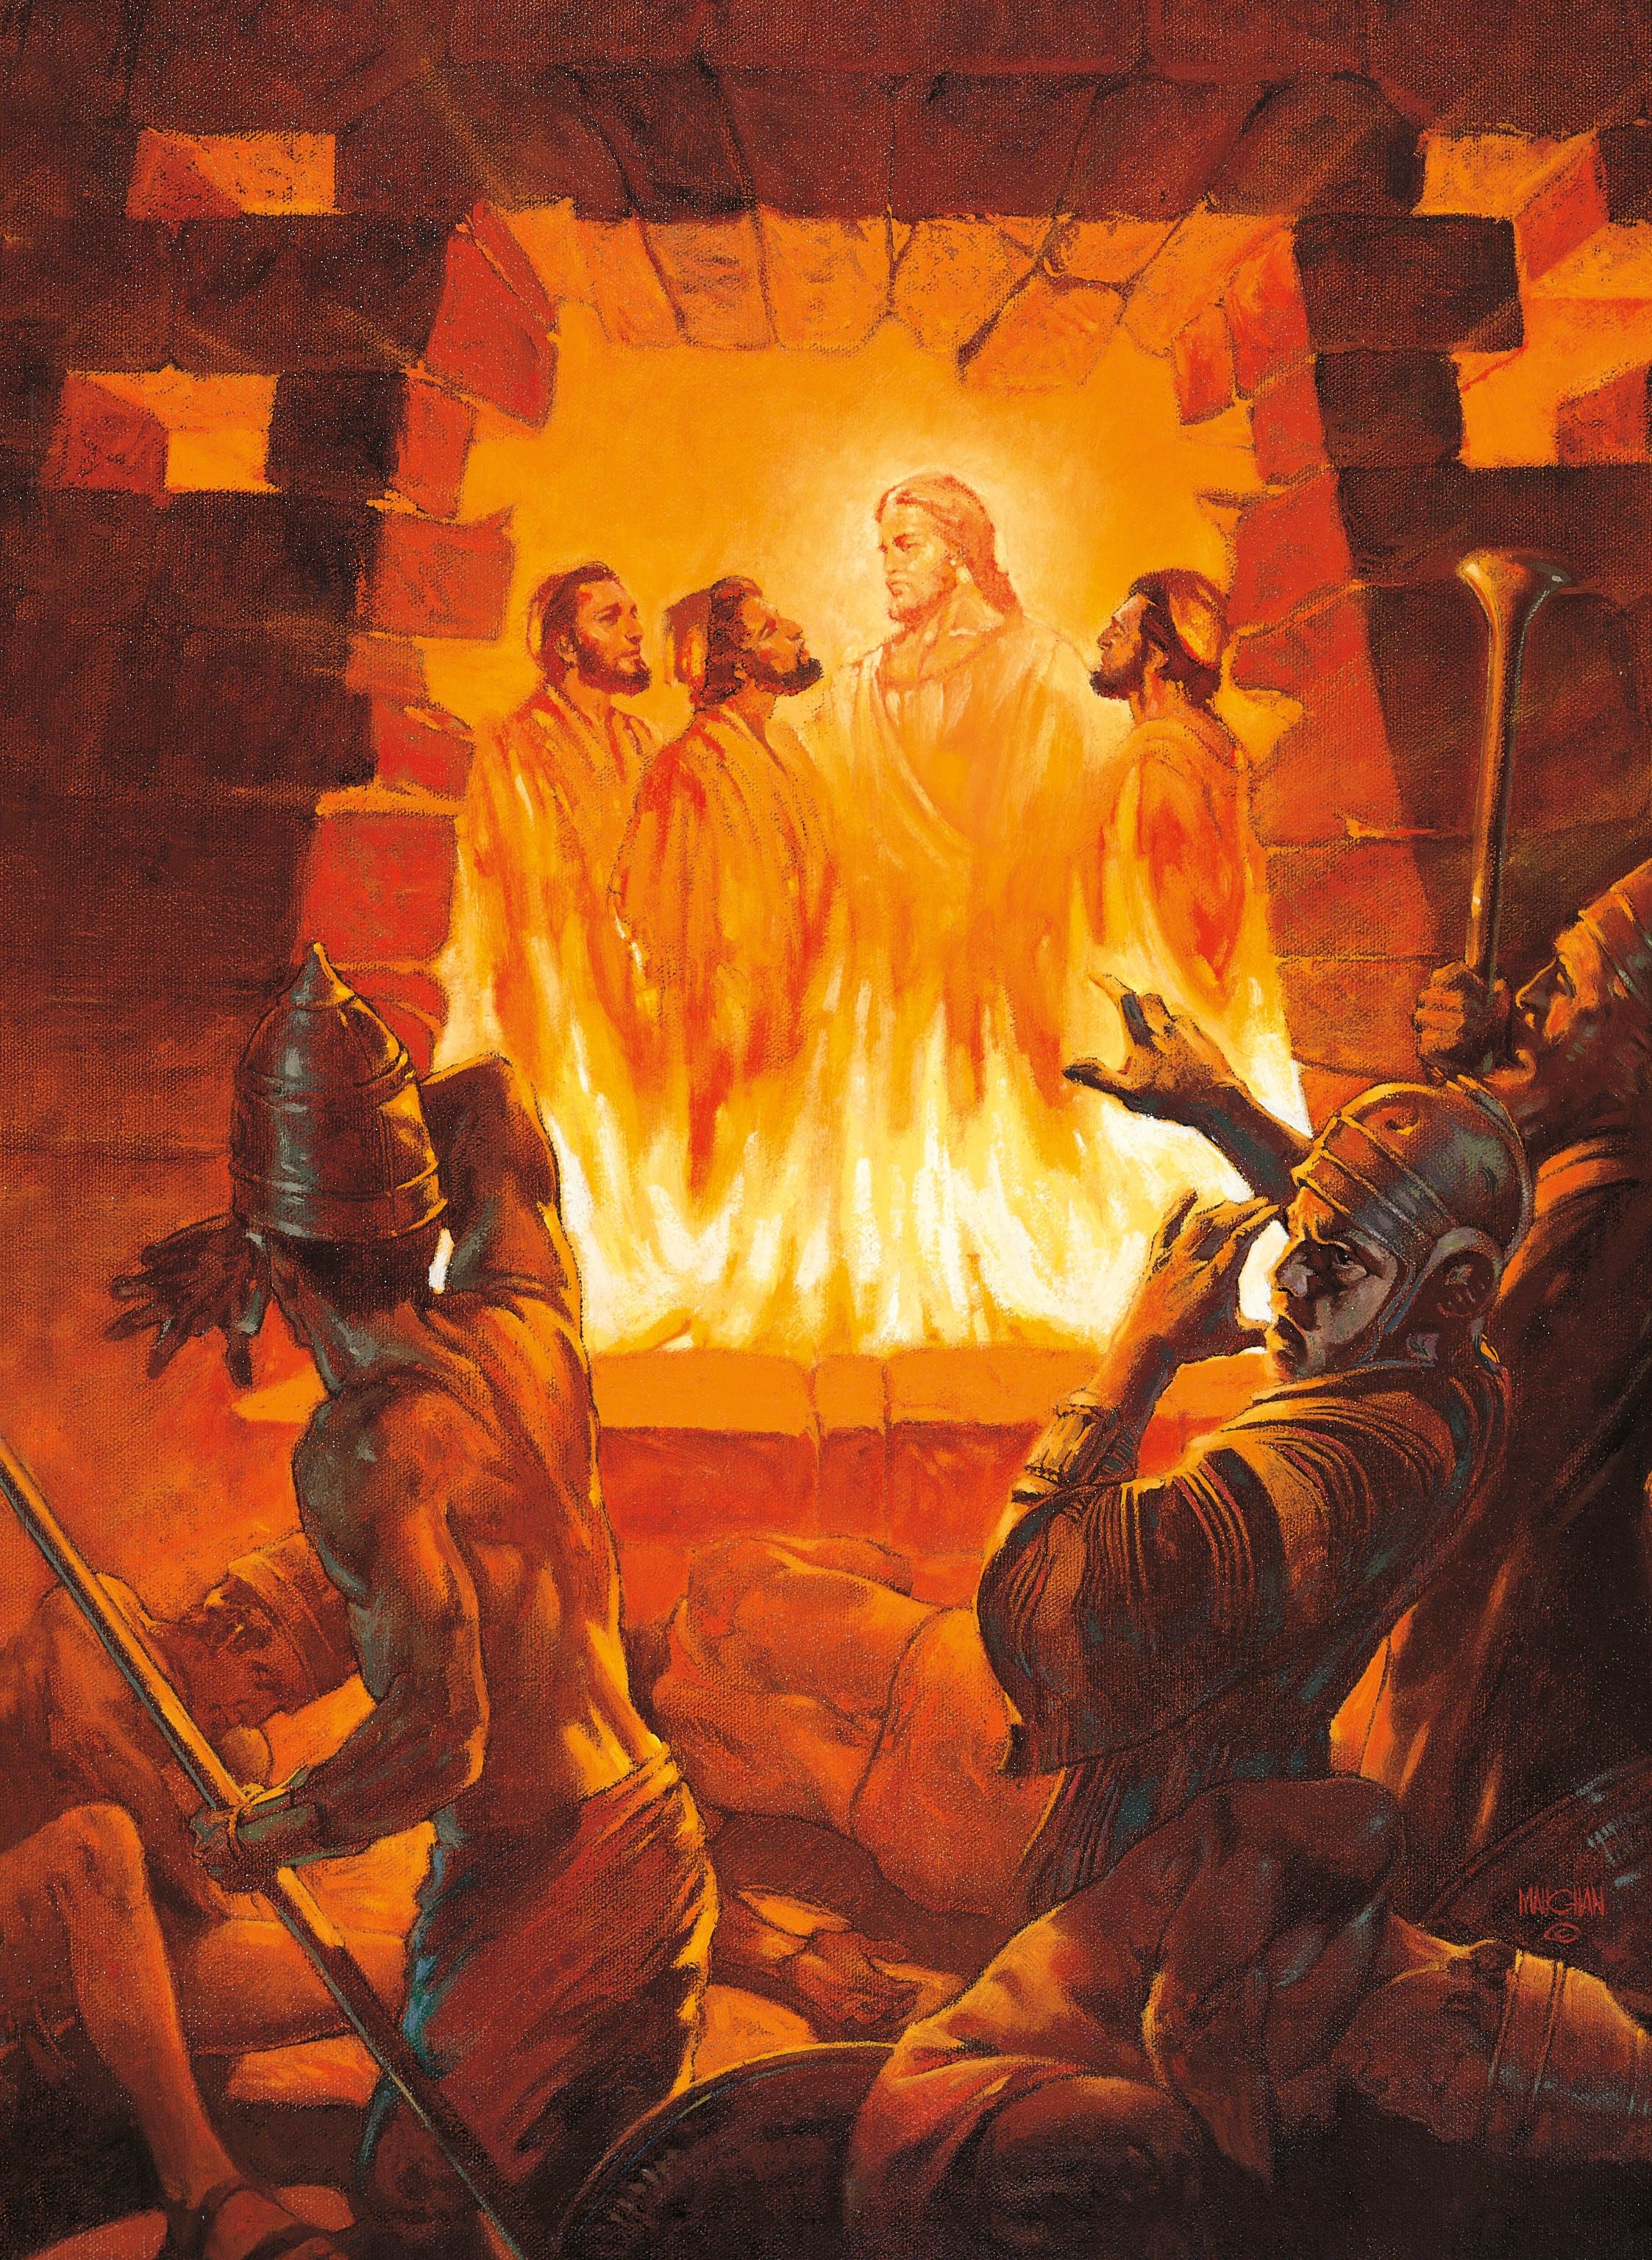 Three Men in the Fiery Furnace (Shadrach, Meshach, and Abednego in the